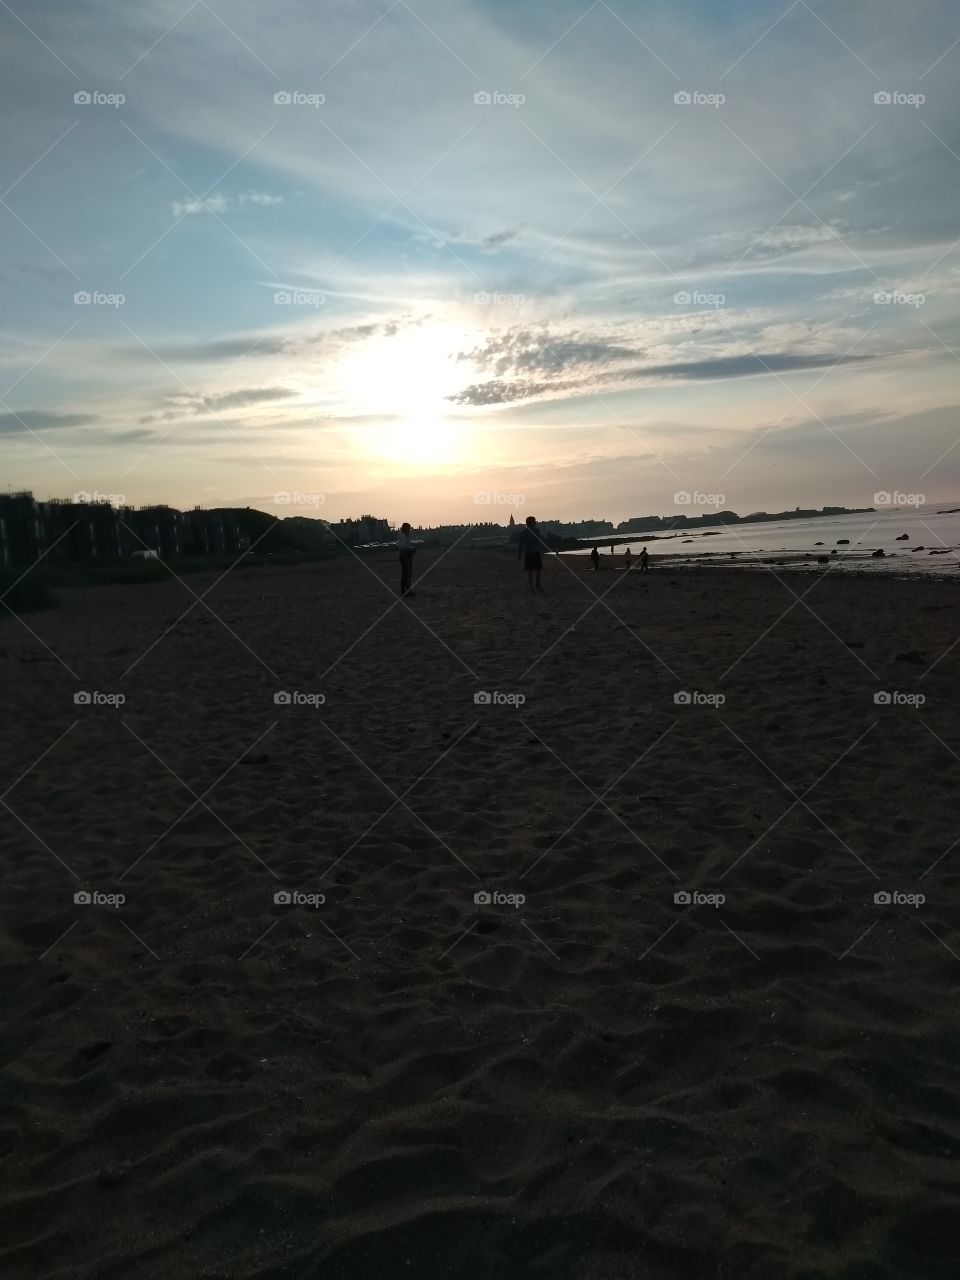 Nearly sunset at North Berwick on August 26th 2019